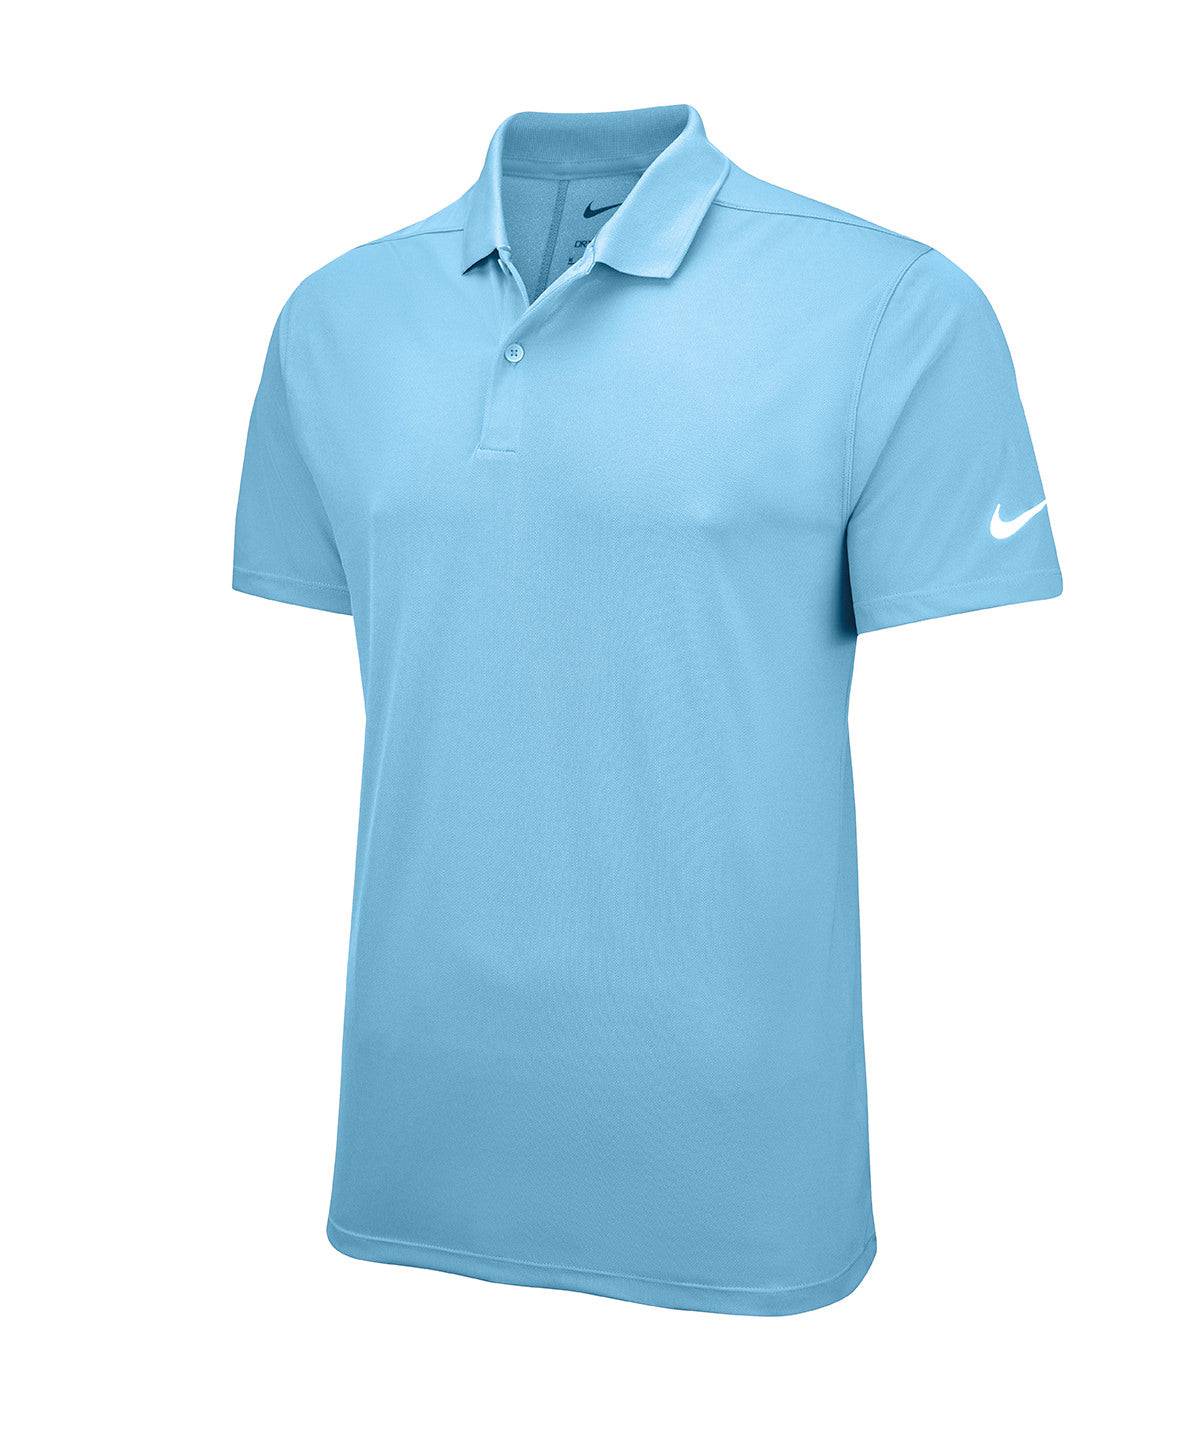 University Blue/White - Nike Victory solid polo